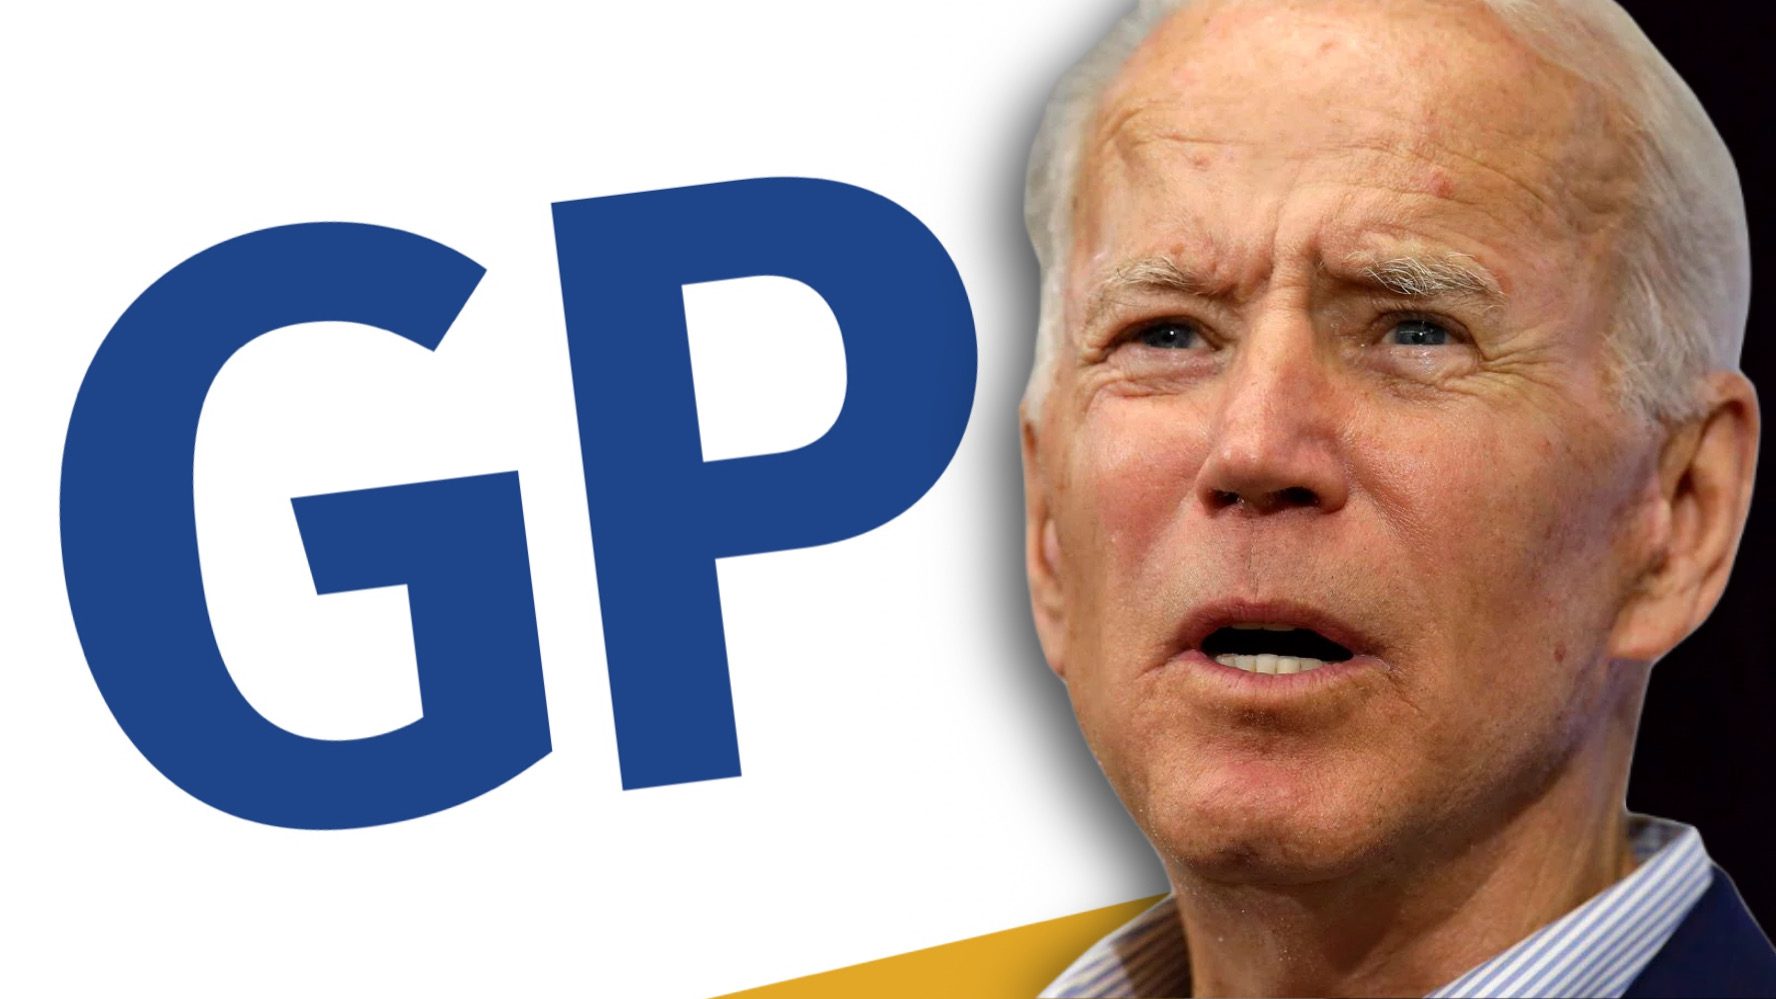 Missouri and Louisiana File MASSIVE Summary of Evidence Discovered in Suit Against the Biden Administration – Detailing Government-Wide Conspiracy to Stifle Free Speech